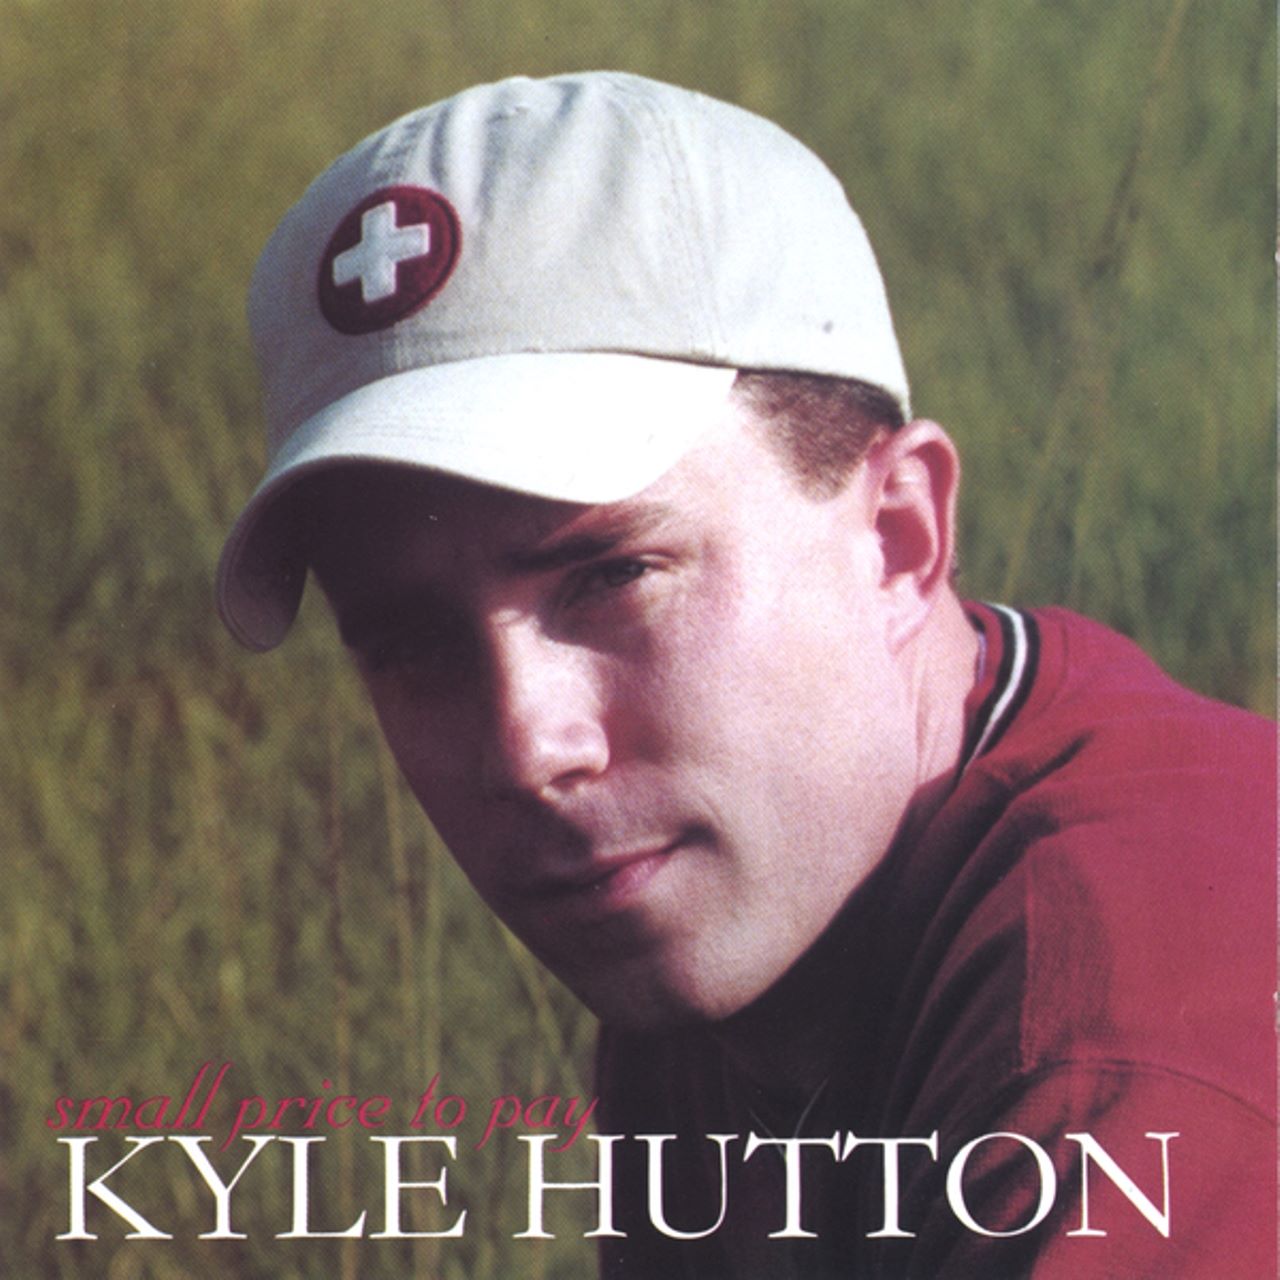 Kyle Hutton - Small Price To Pay cover album